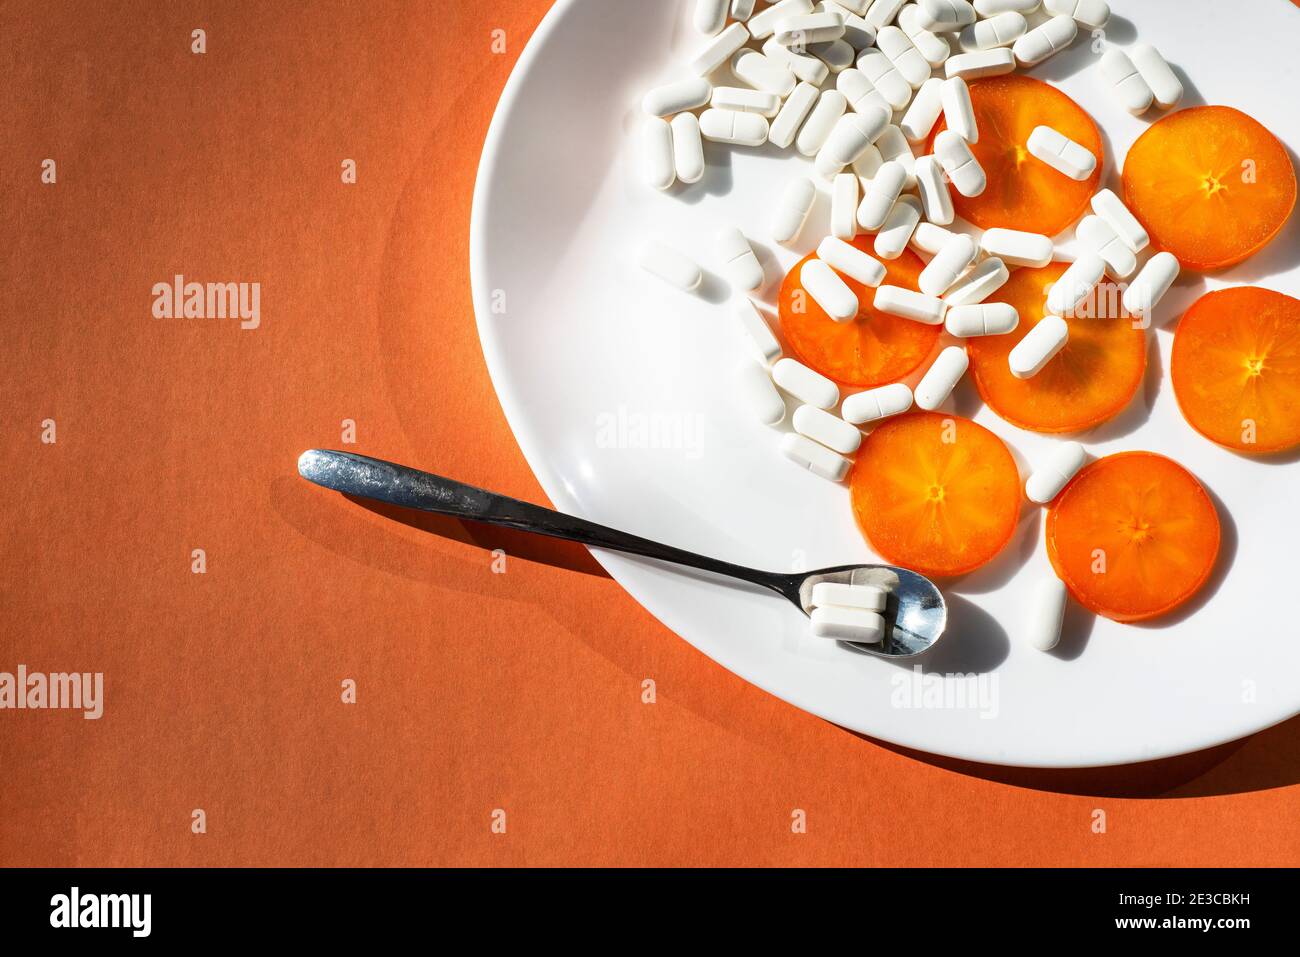 On an oval white plate - persimmon orange slices, capsules of mineral supplements and a spoon with a pill. Orange. Biohacking on health topics. Stock Photo